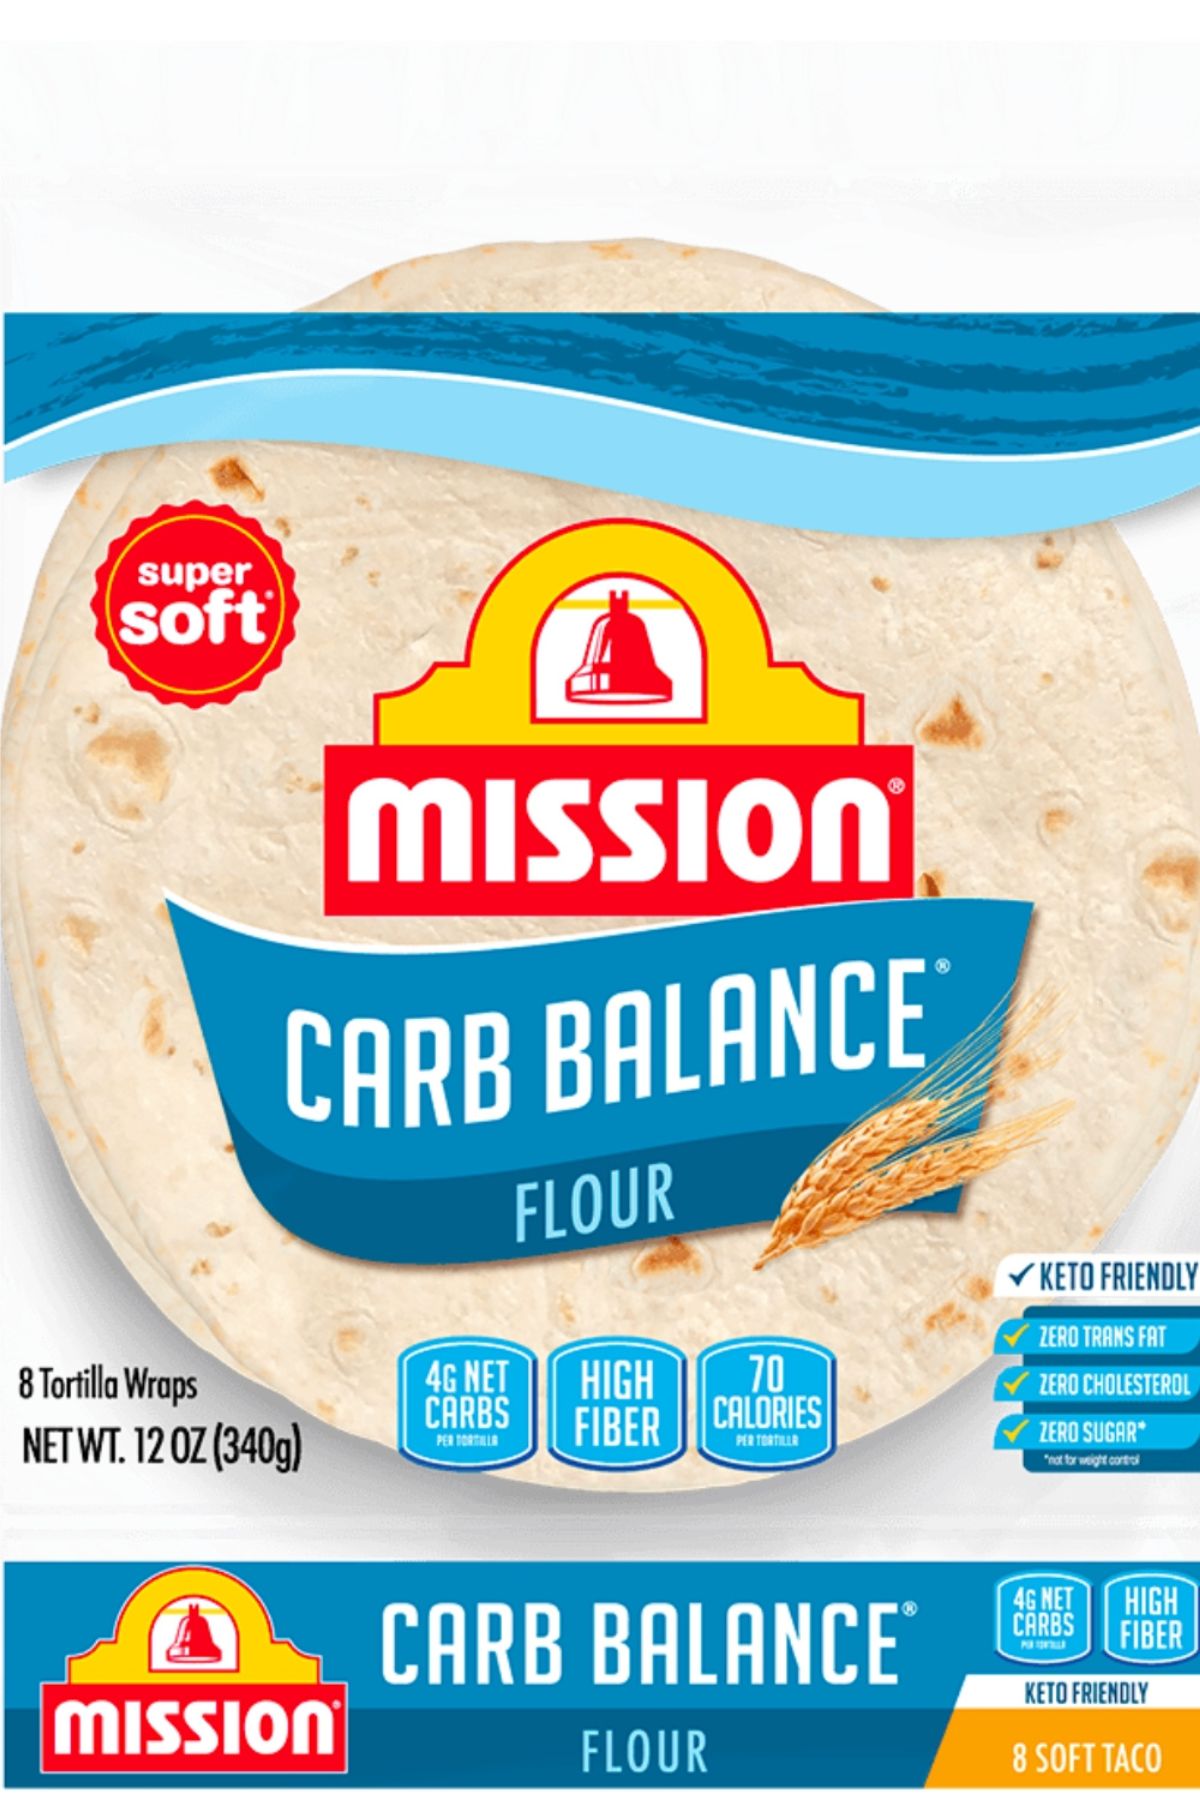 Mission flour tortillas in package.